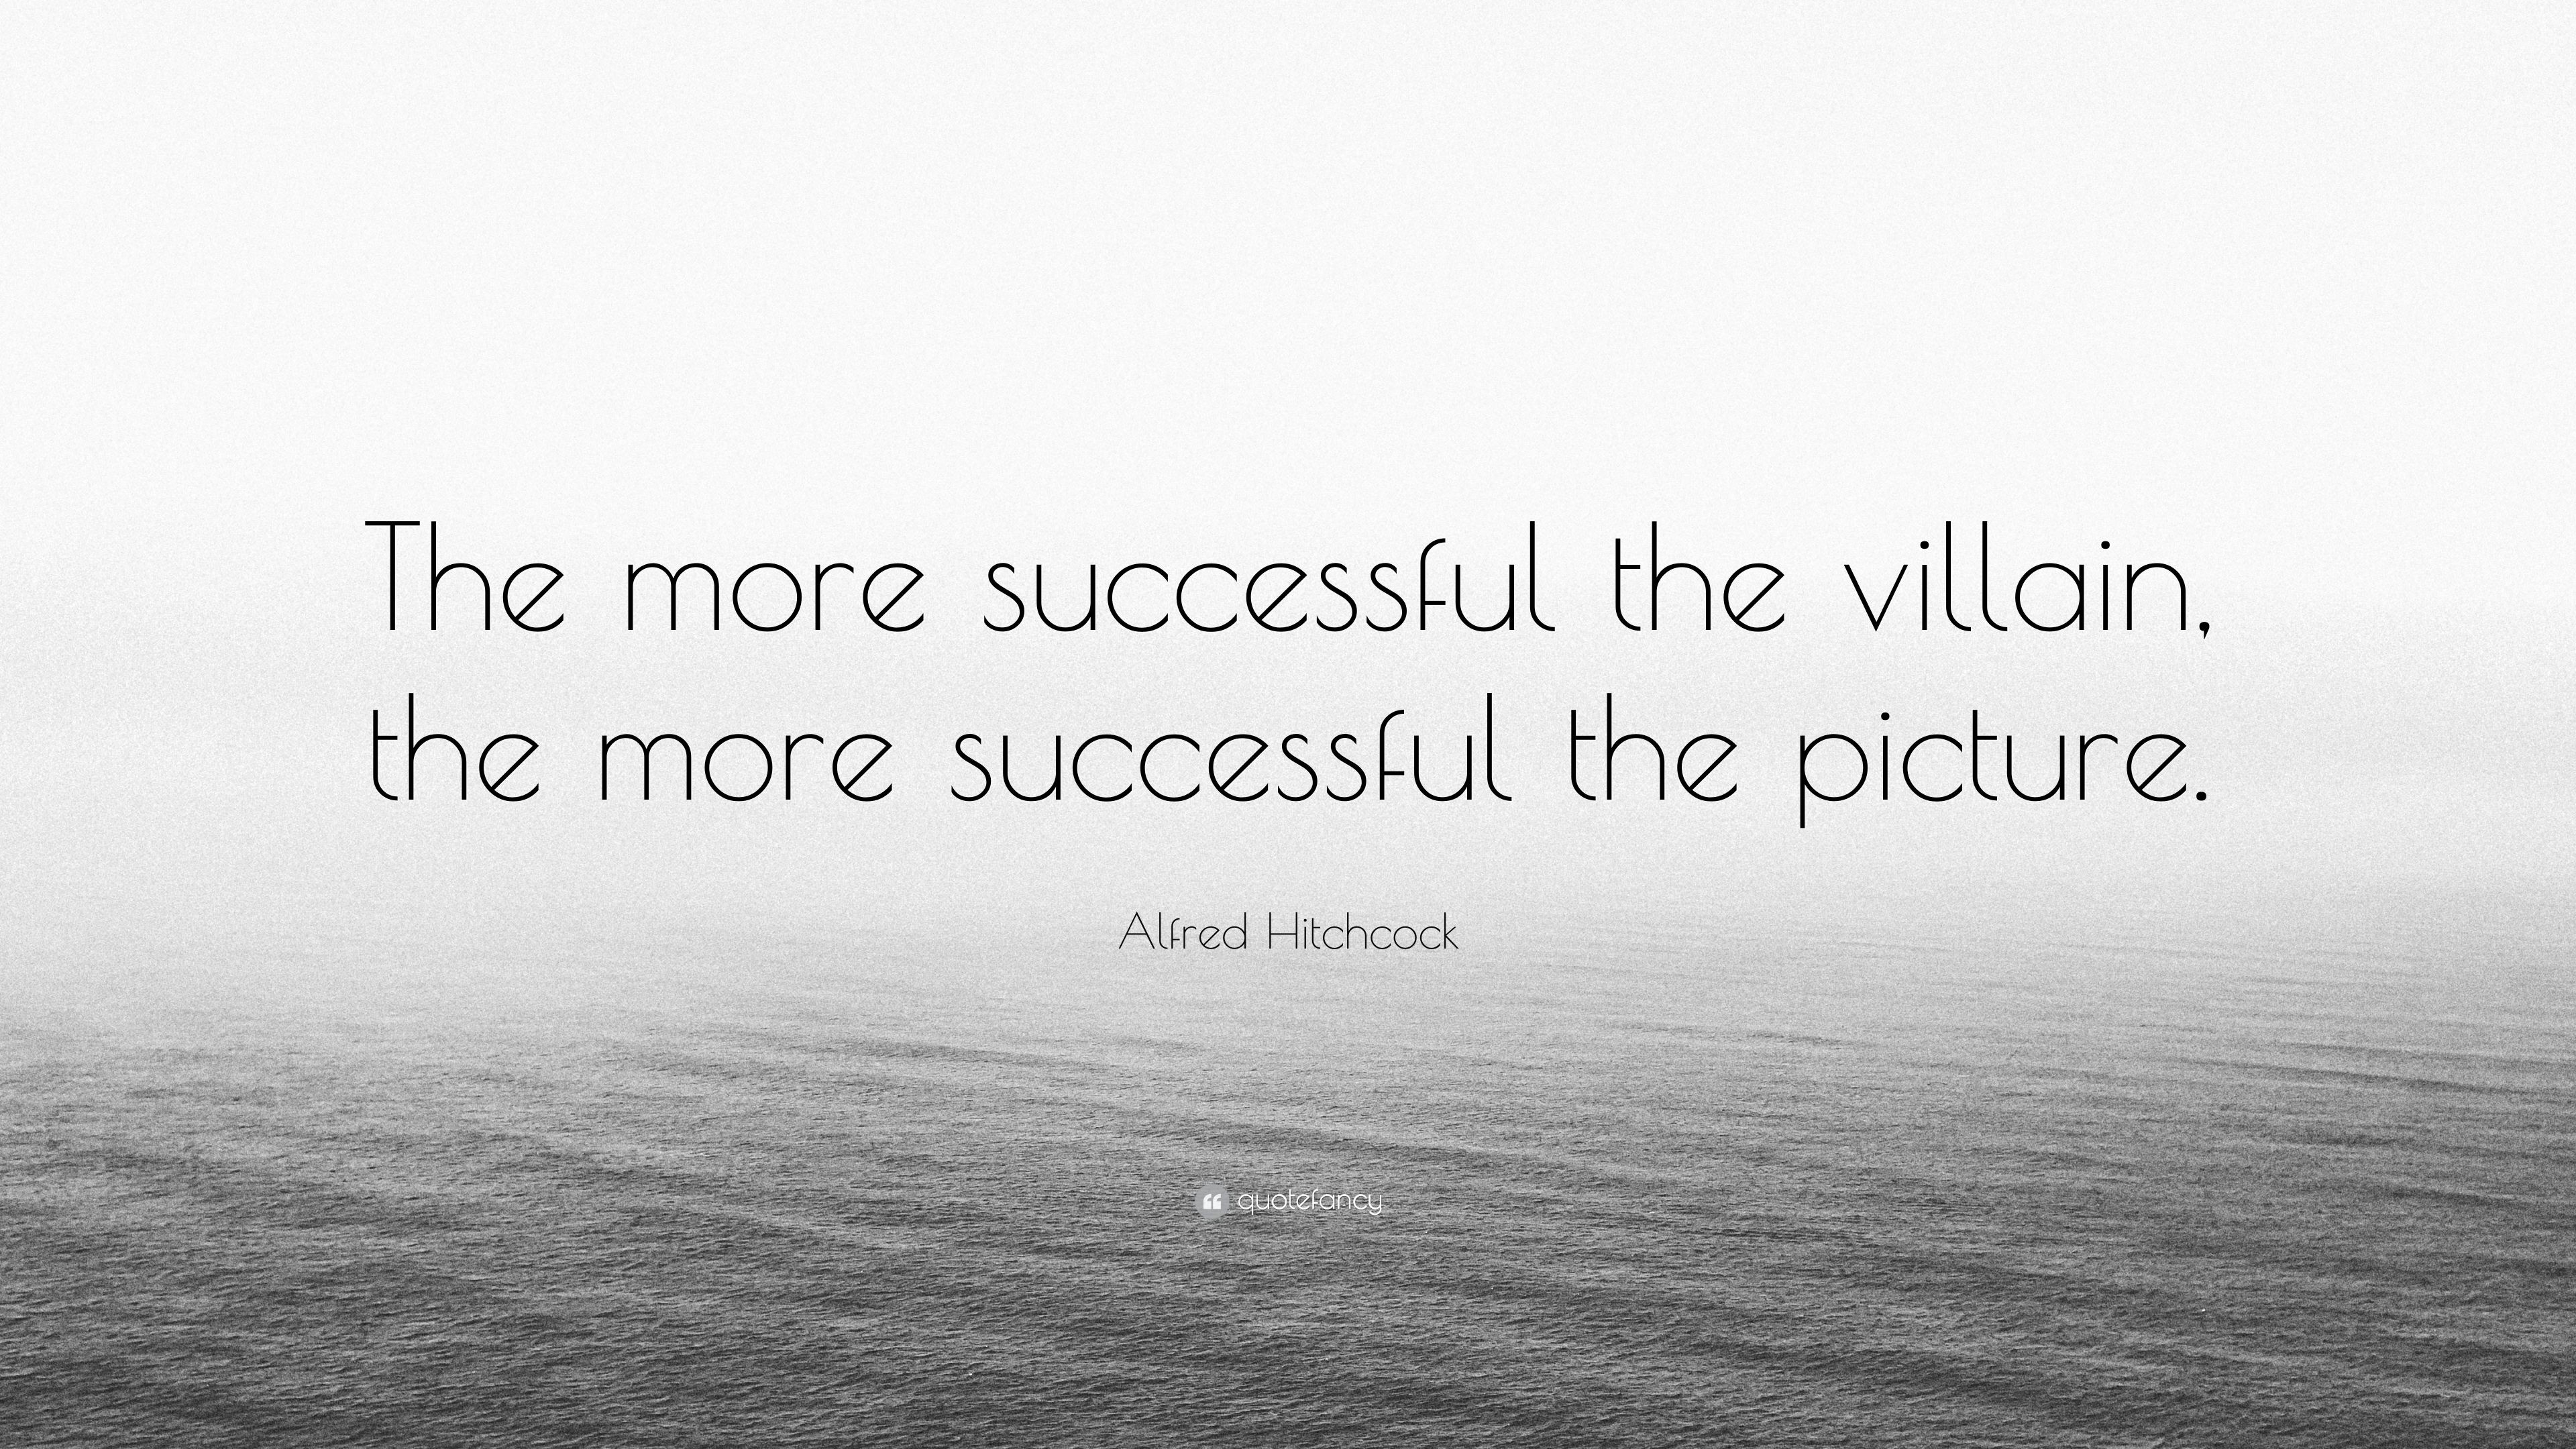 3840x2160 Alfred Hitchcock Quote: “The more successful the villain, the more  successful the picture